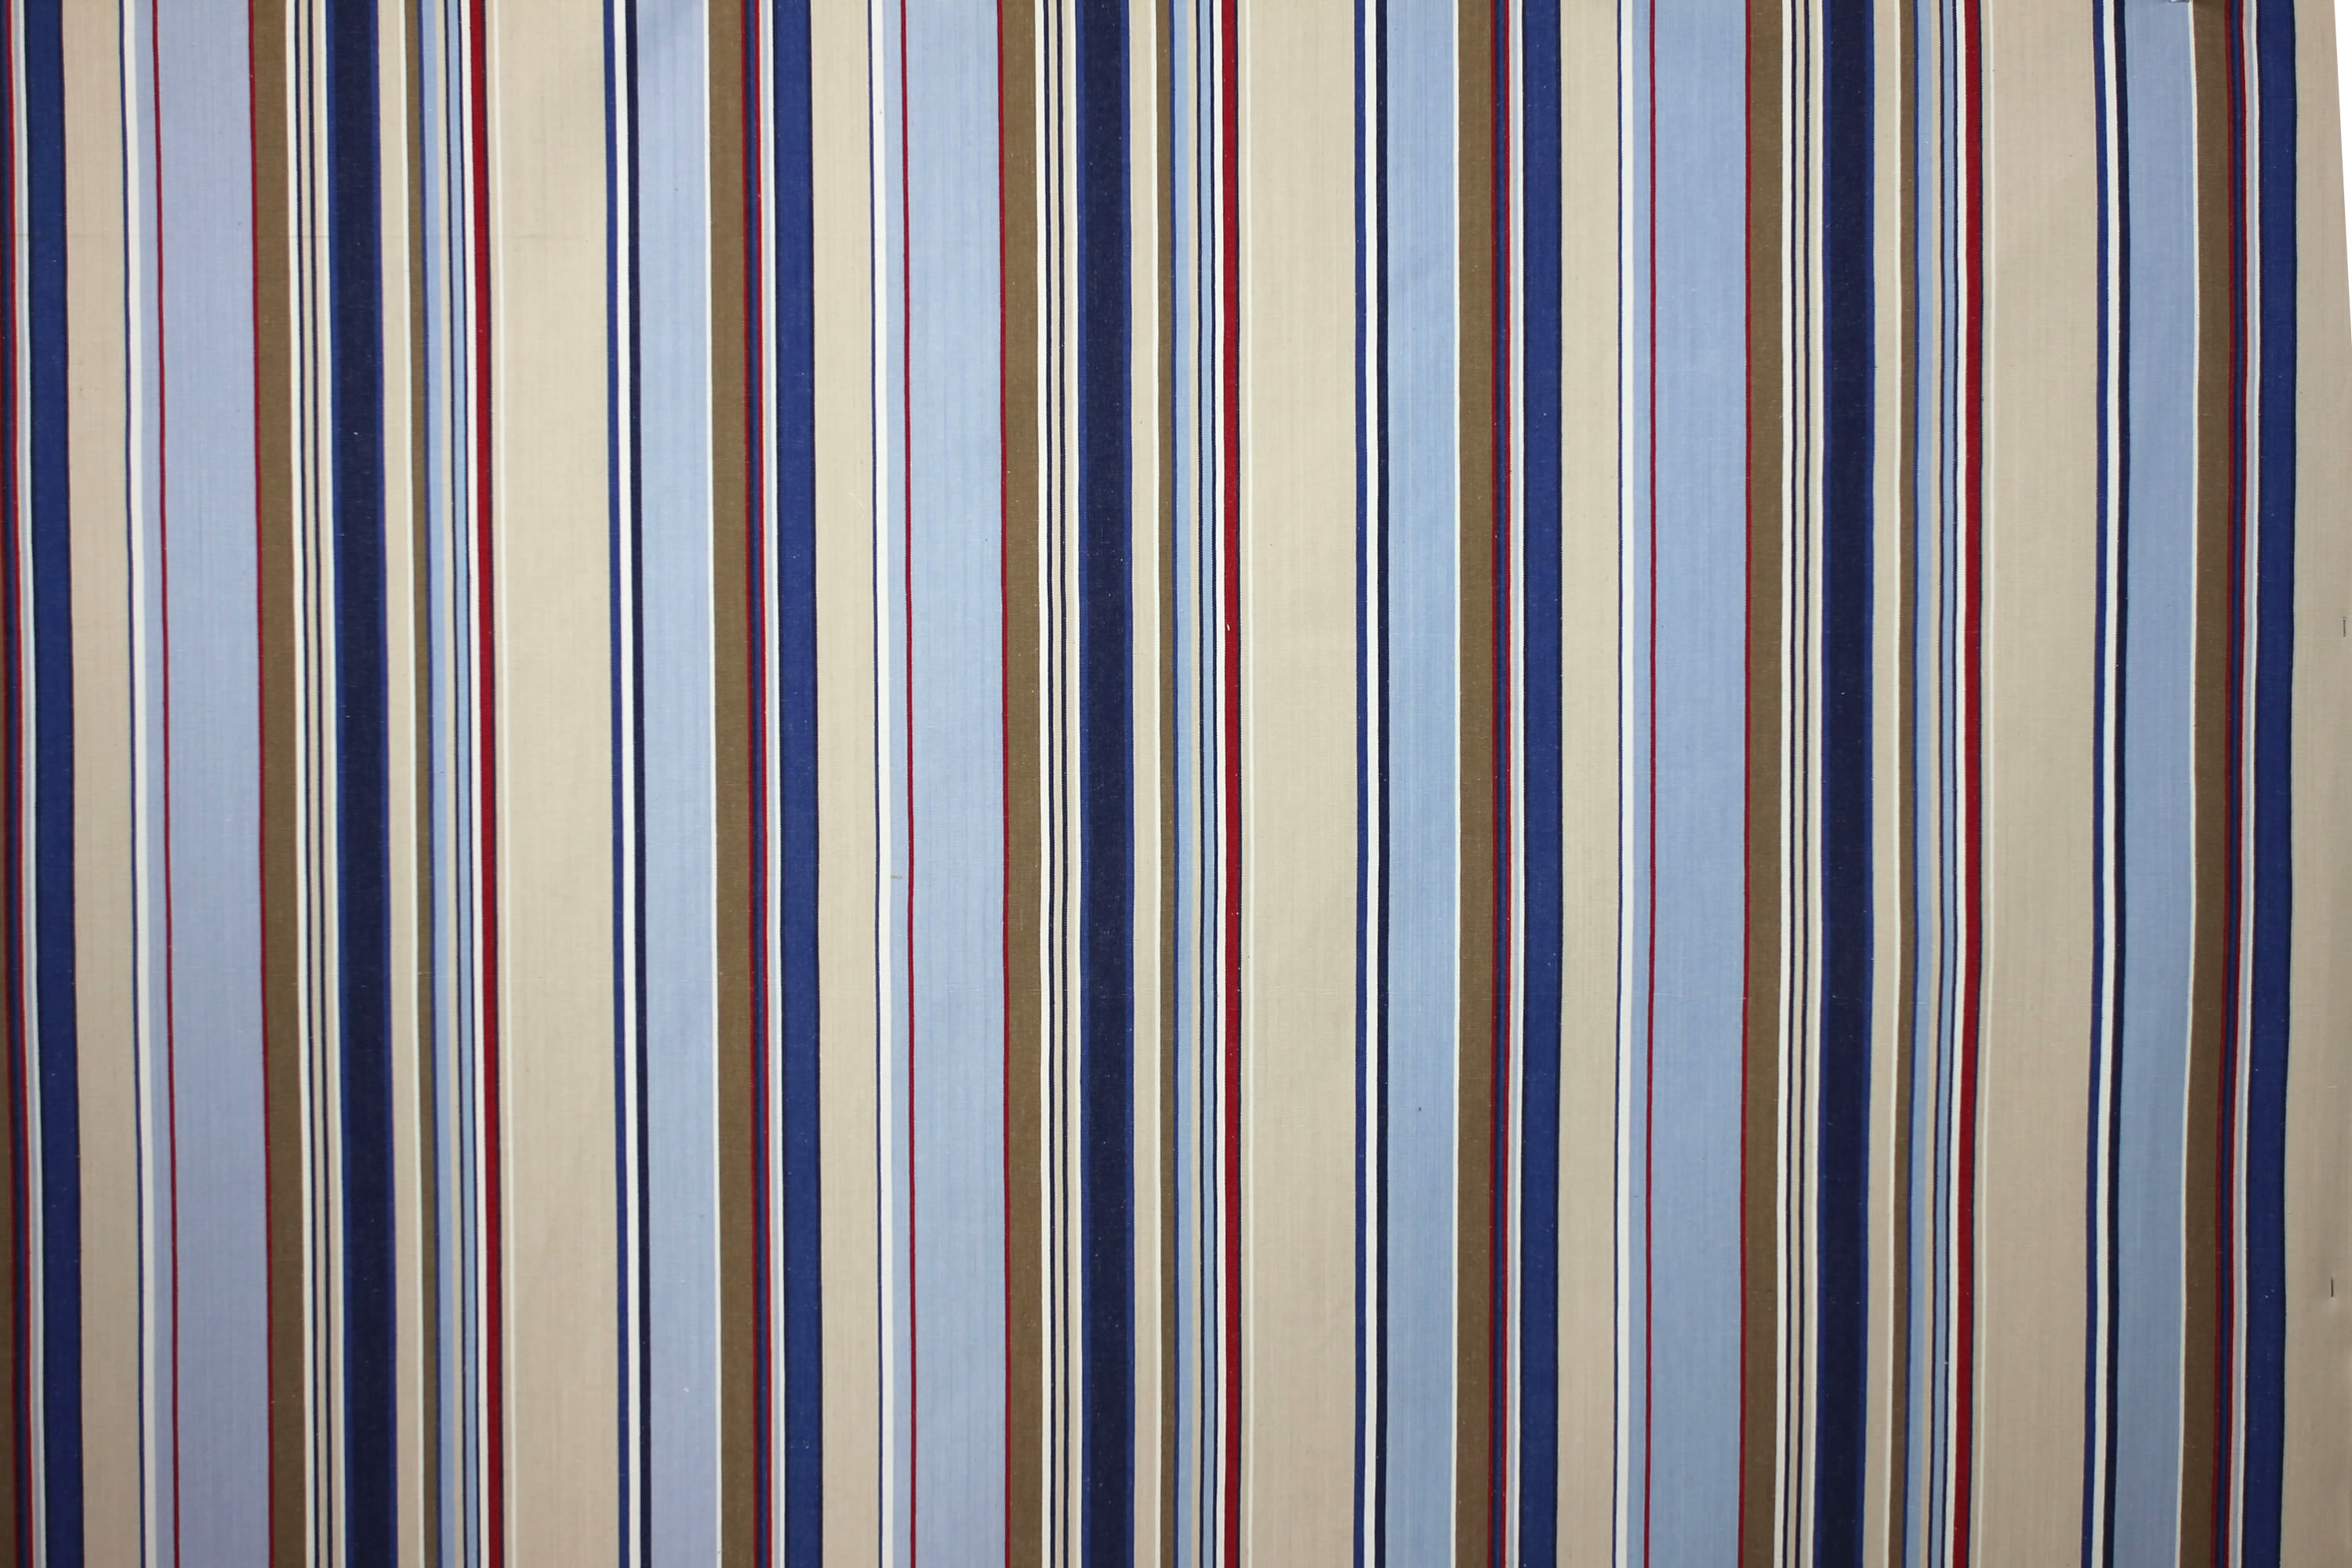 Wipe Clean Fabrics Stripes | Water Repellent Coated Fabrics pale blue, light grey, royal blue   